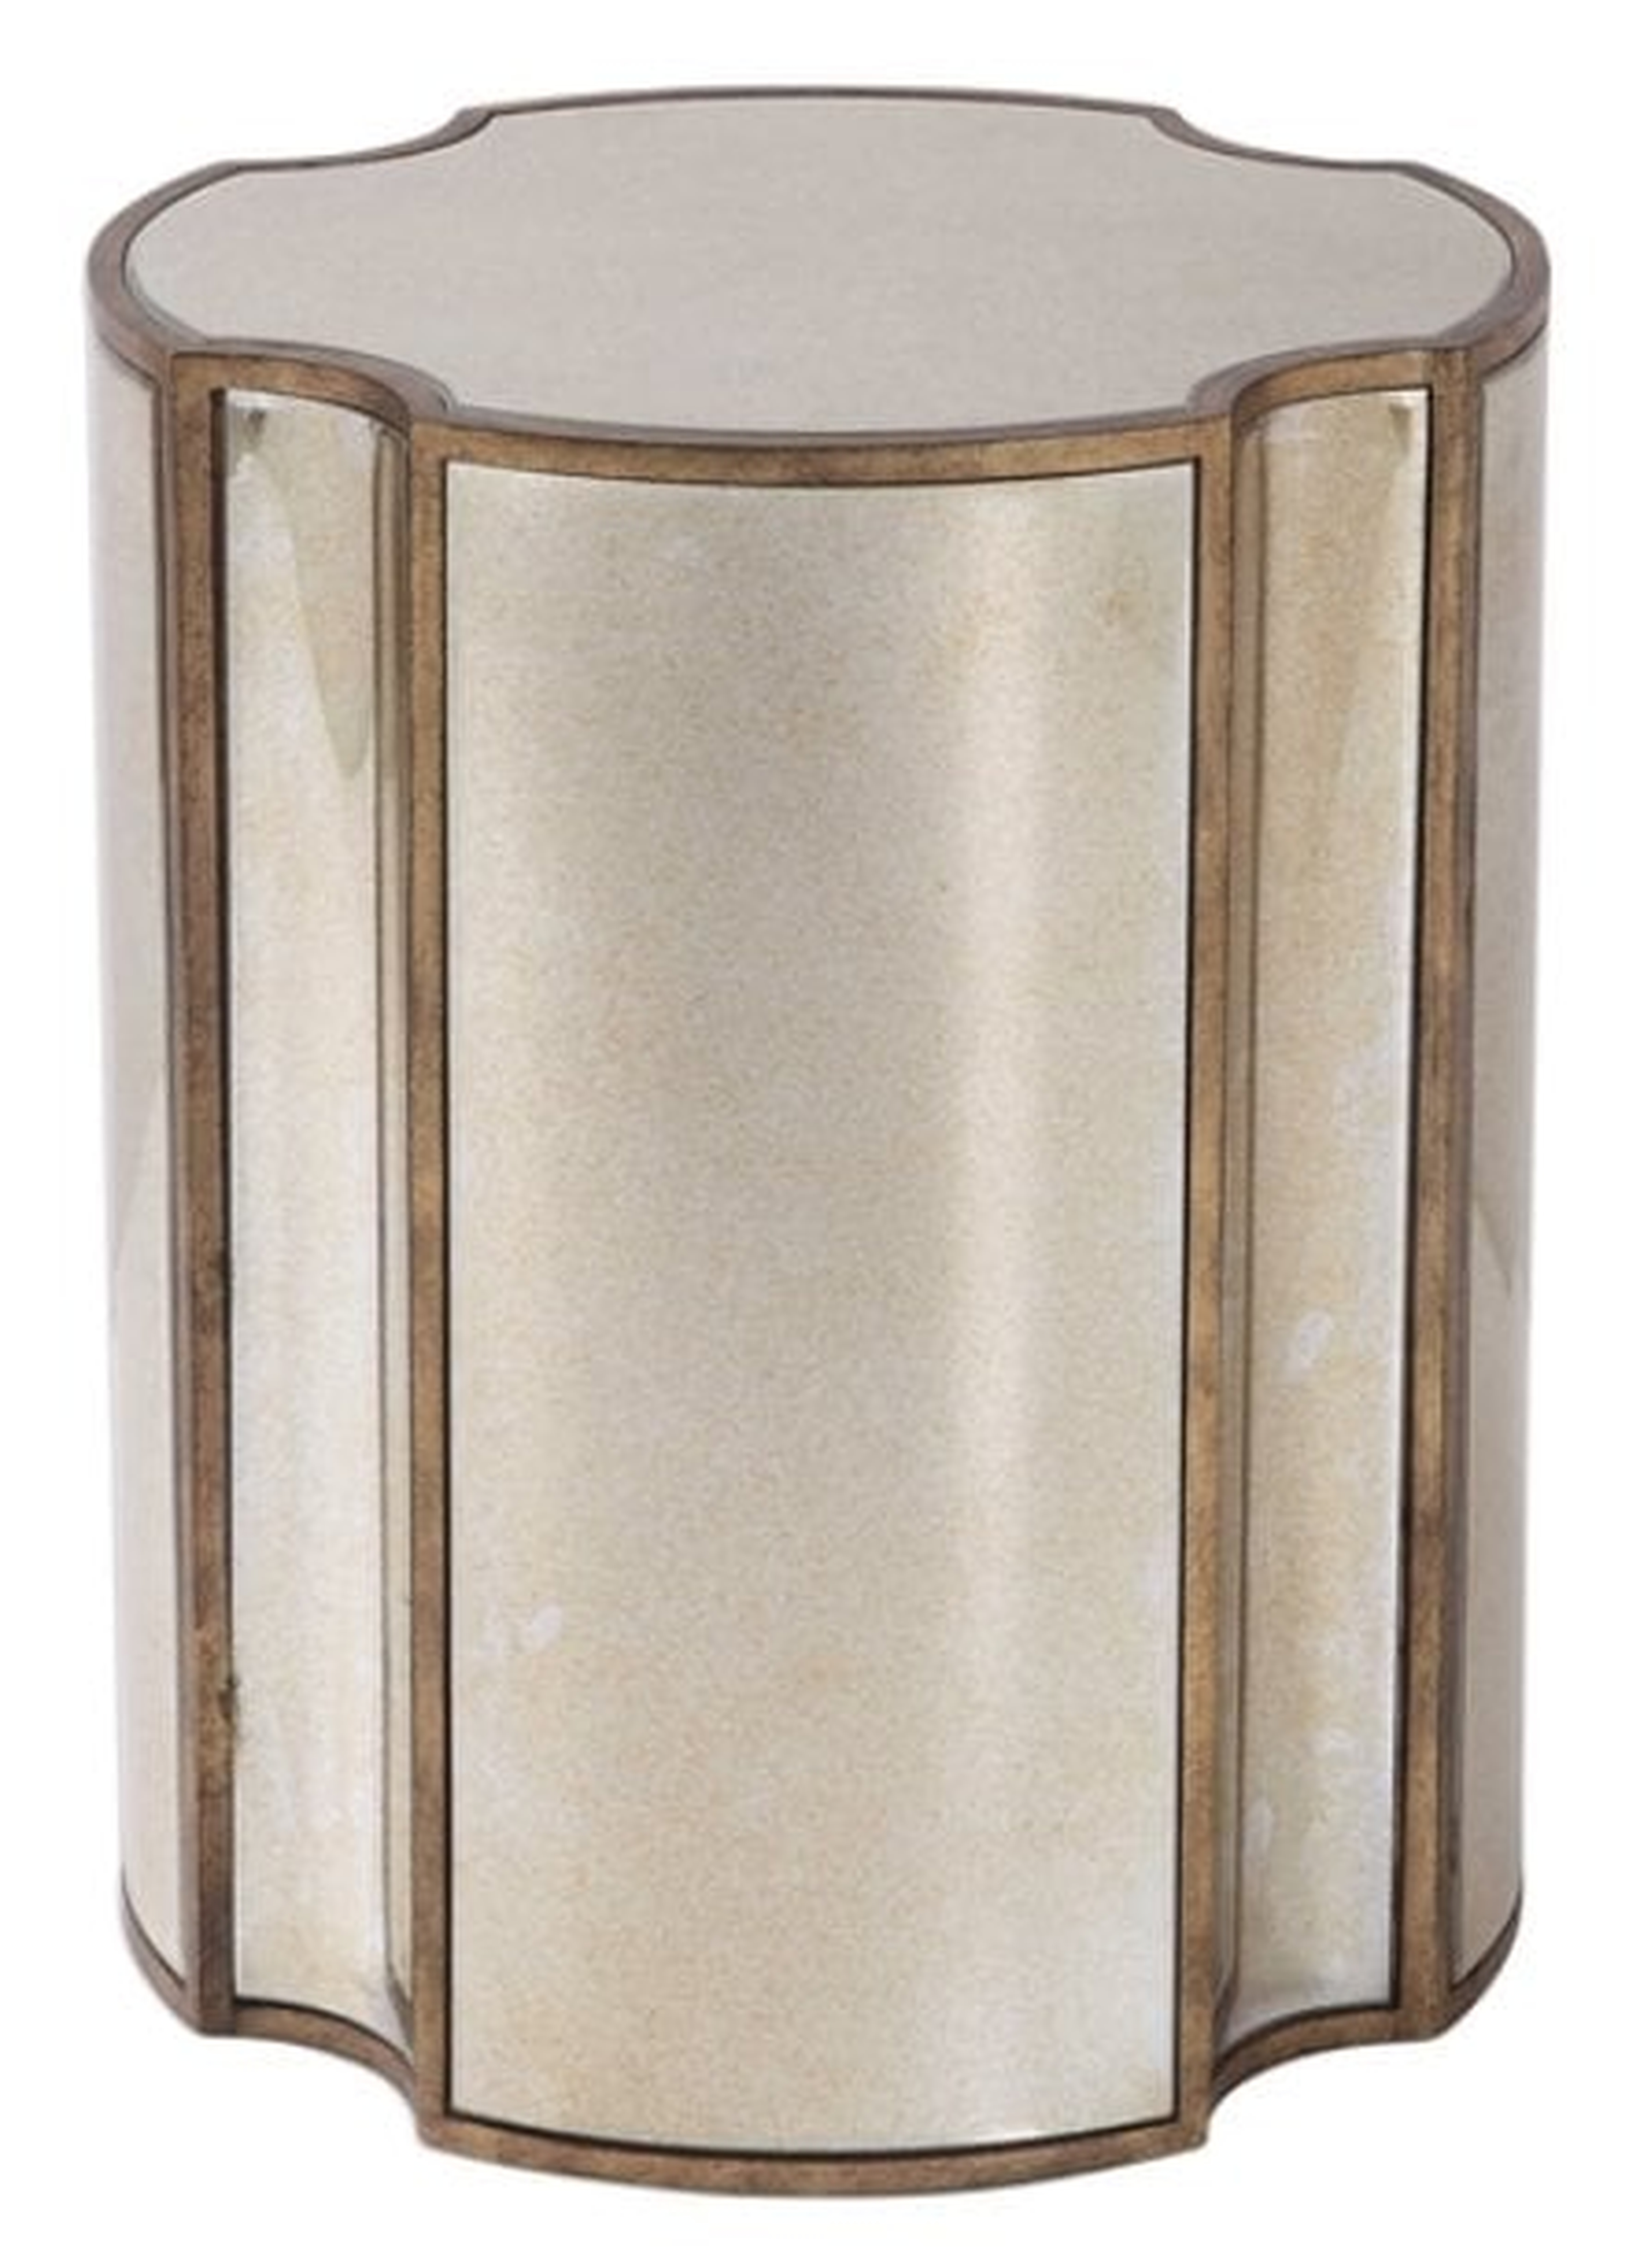 Harlow Accent Table - Hudsonhill Foundry